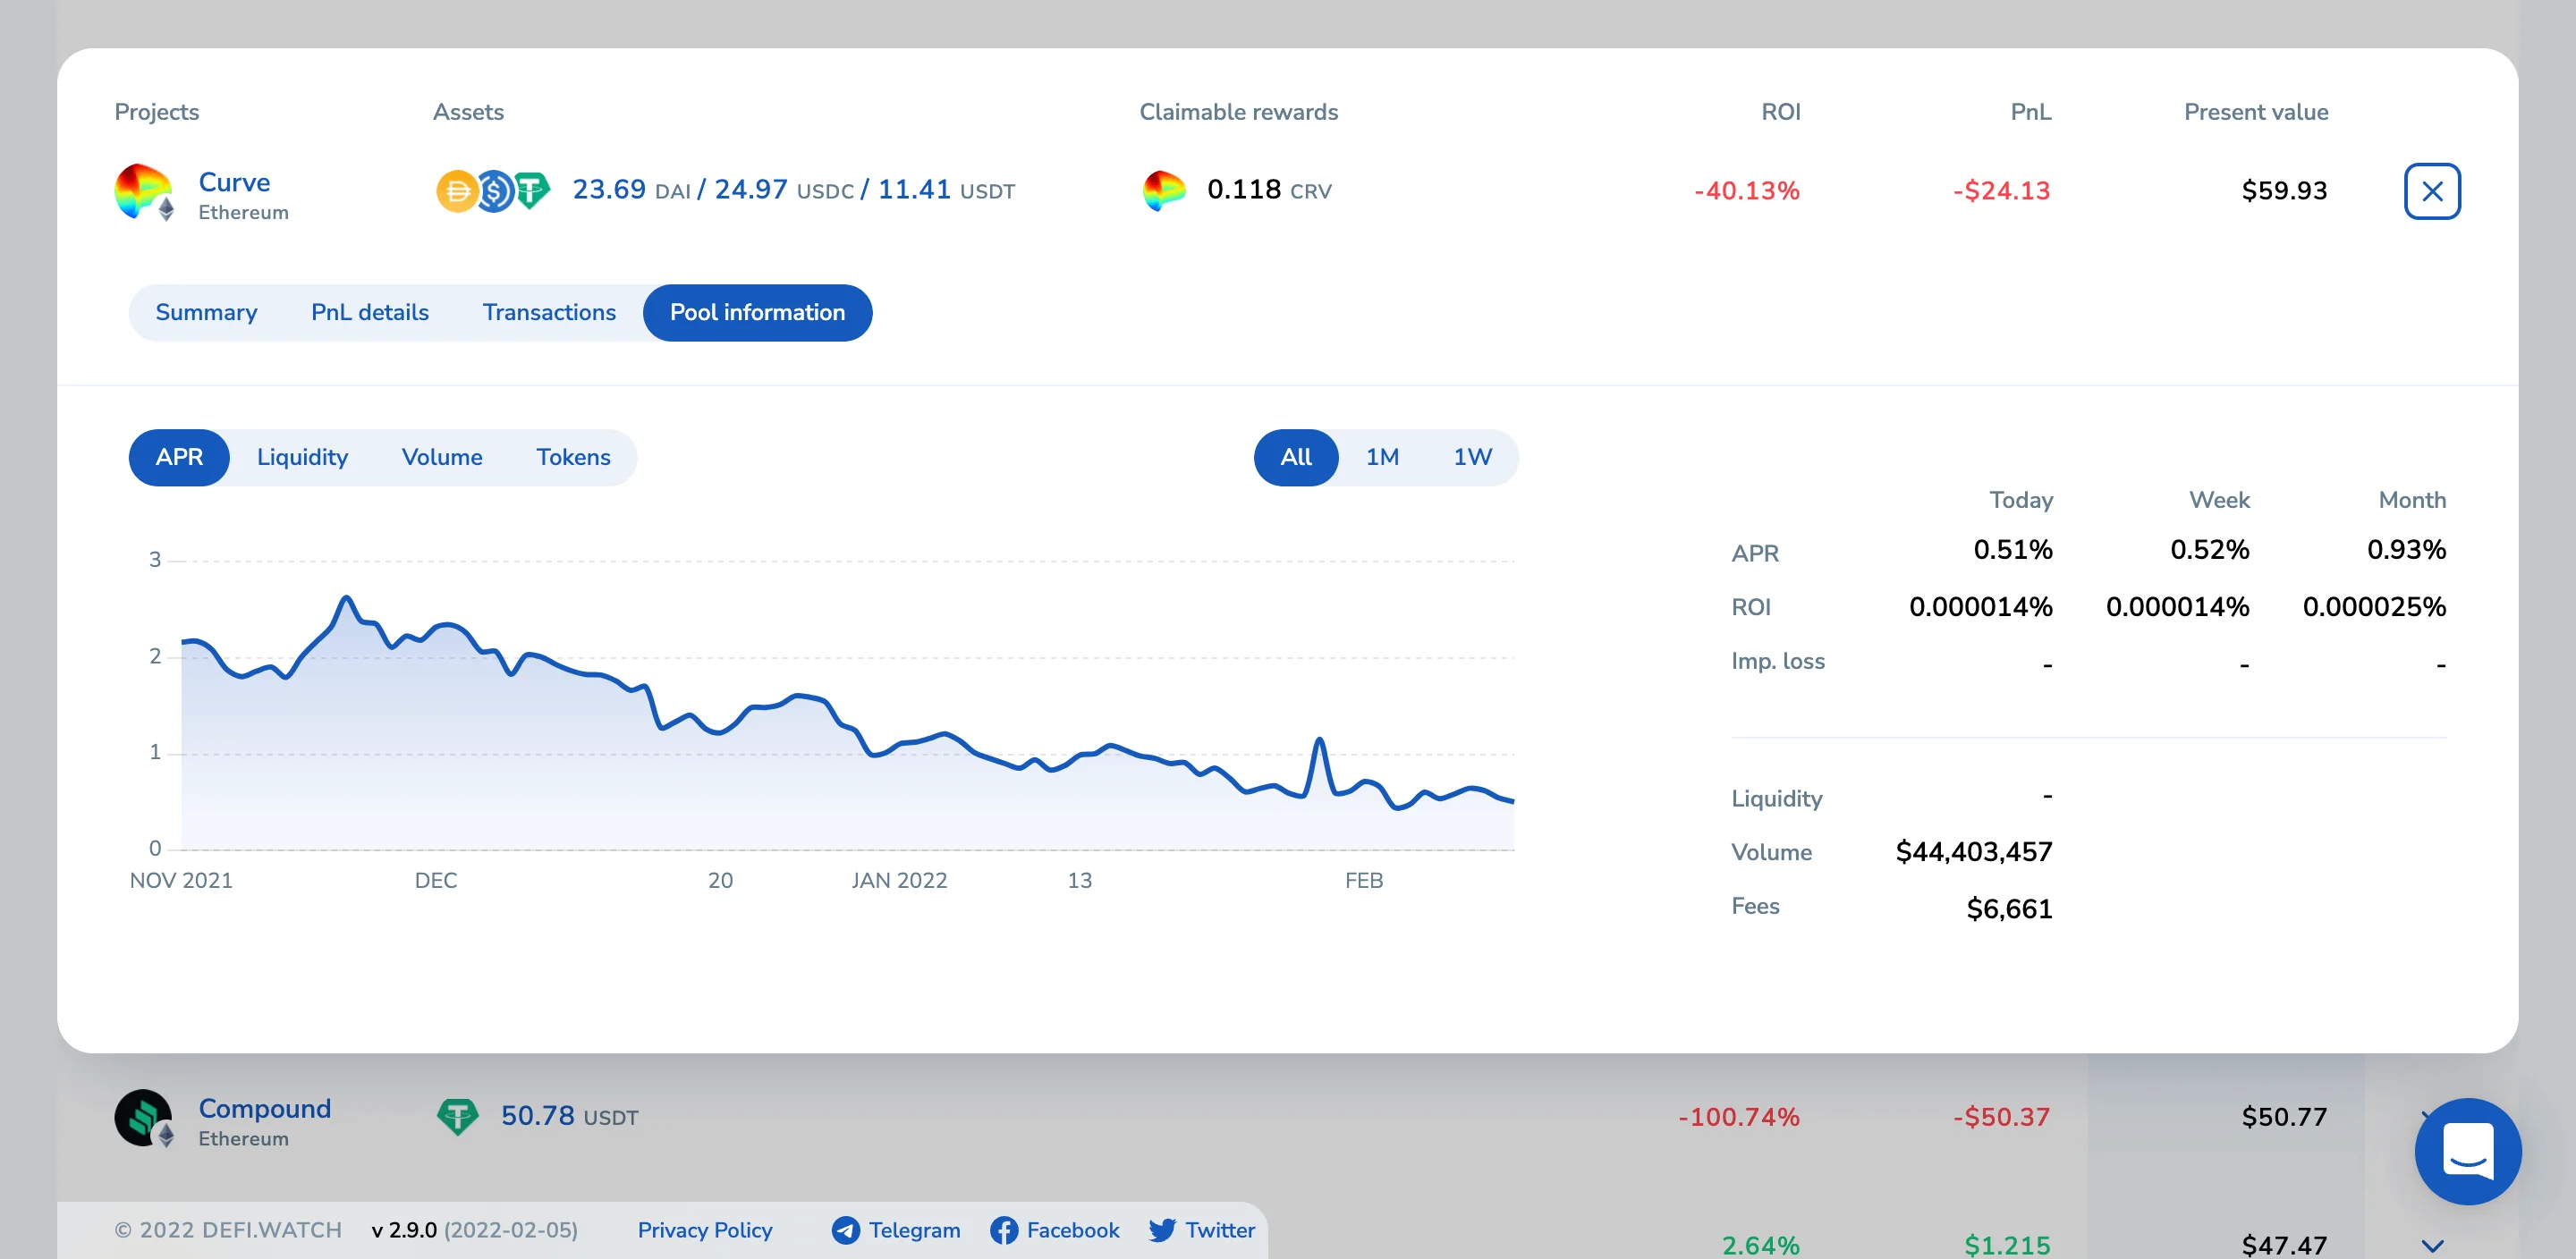 After connecting your wallet to the DeFi Watch, you can get a more detailed analysis of your investment positions.